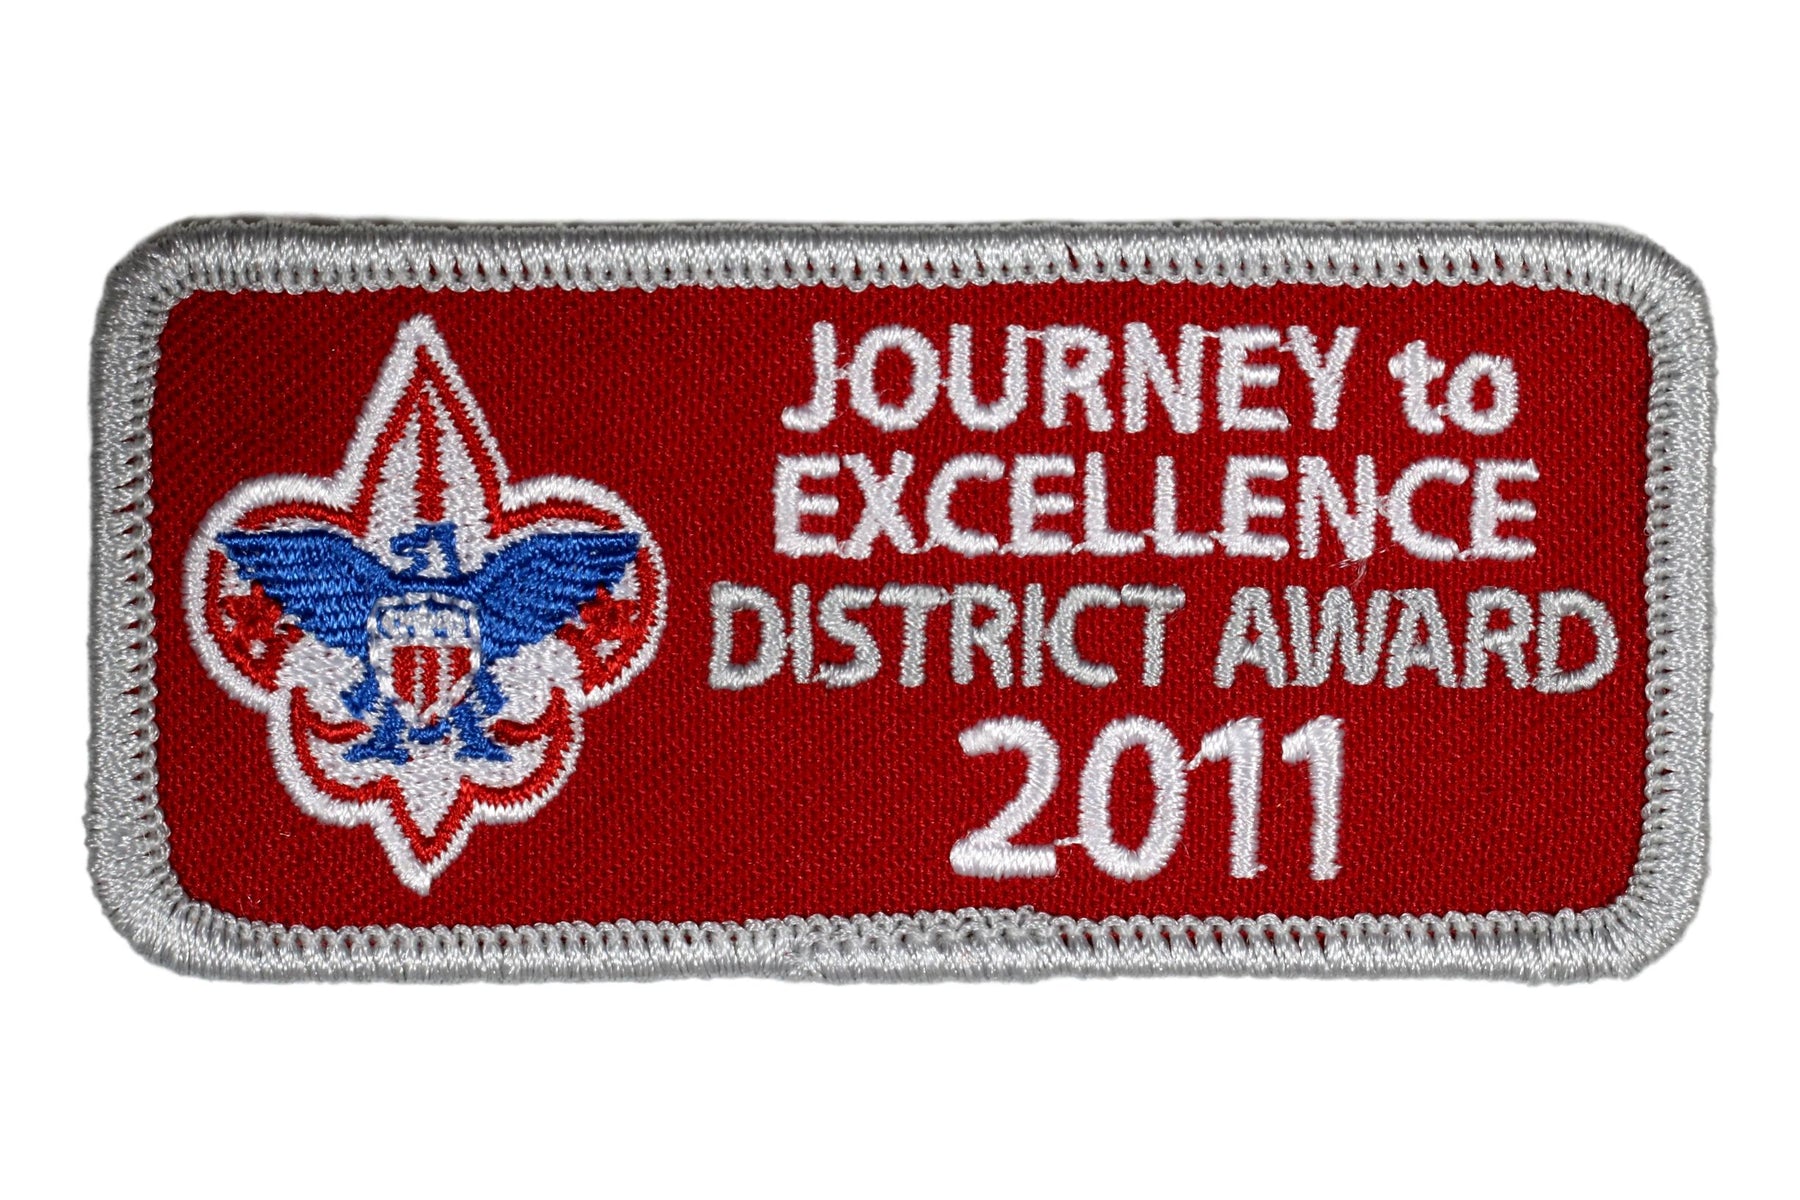 2011 District Journey to Excellence Award Silver Patch